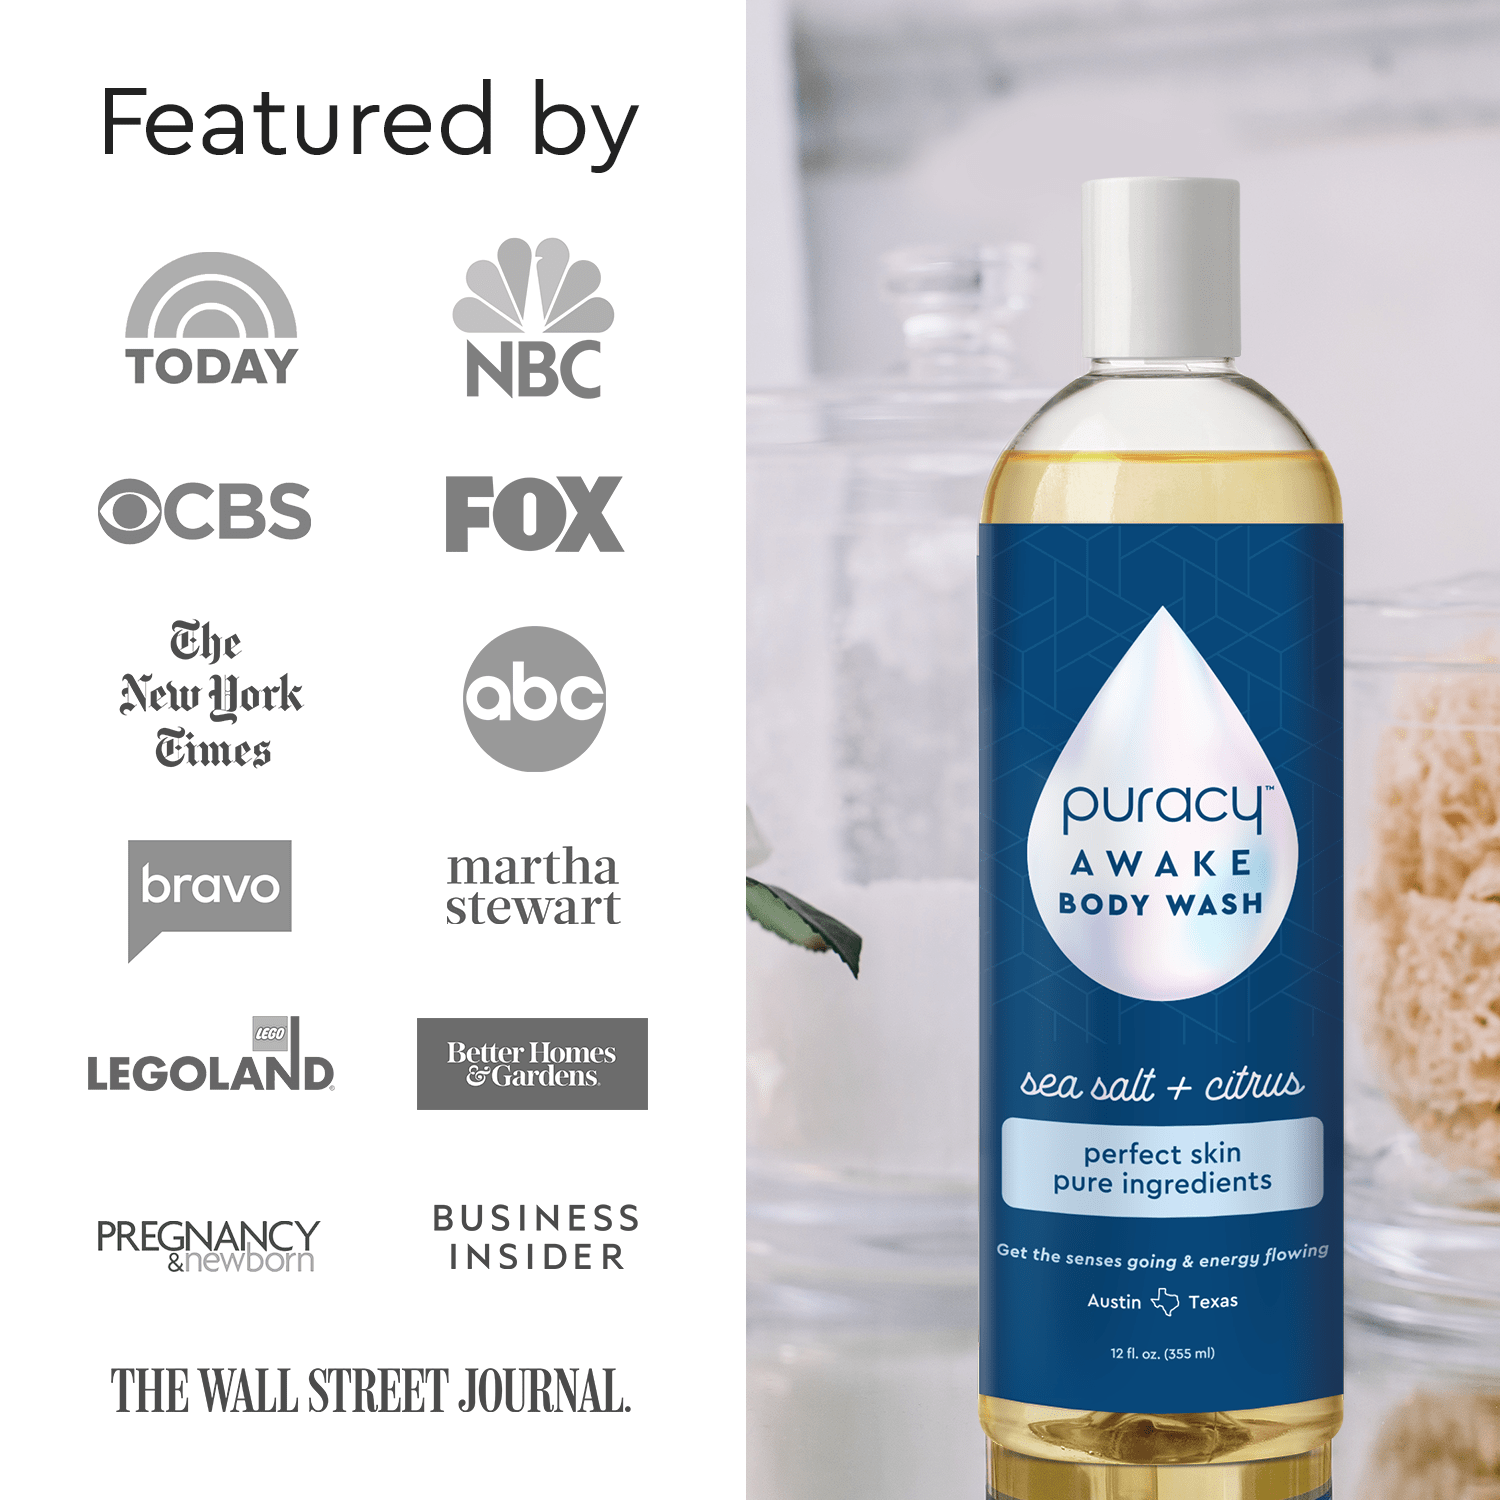 Puracy Natural Body Wash featured by media outfits